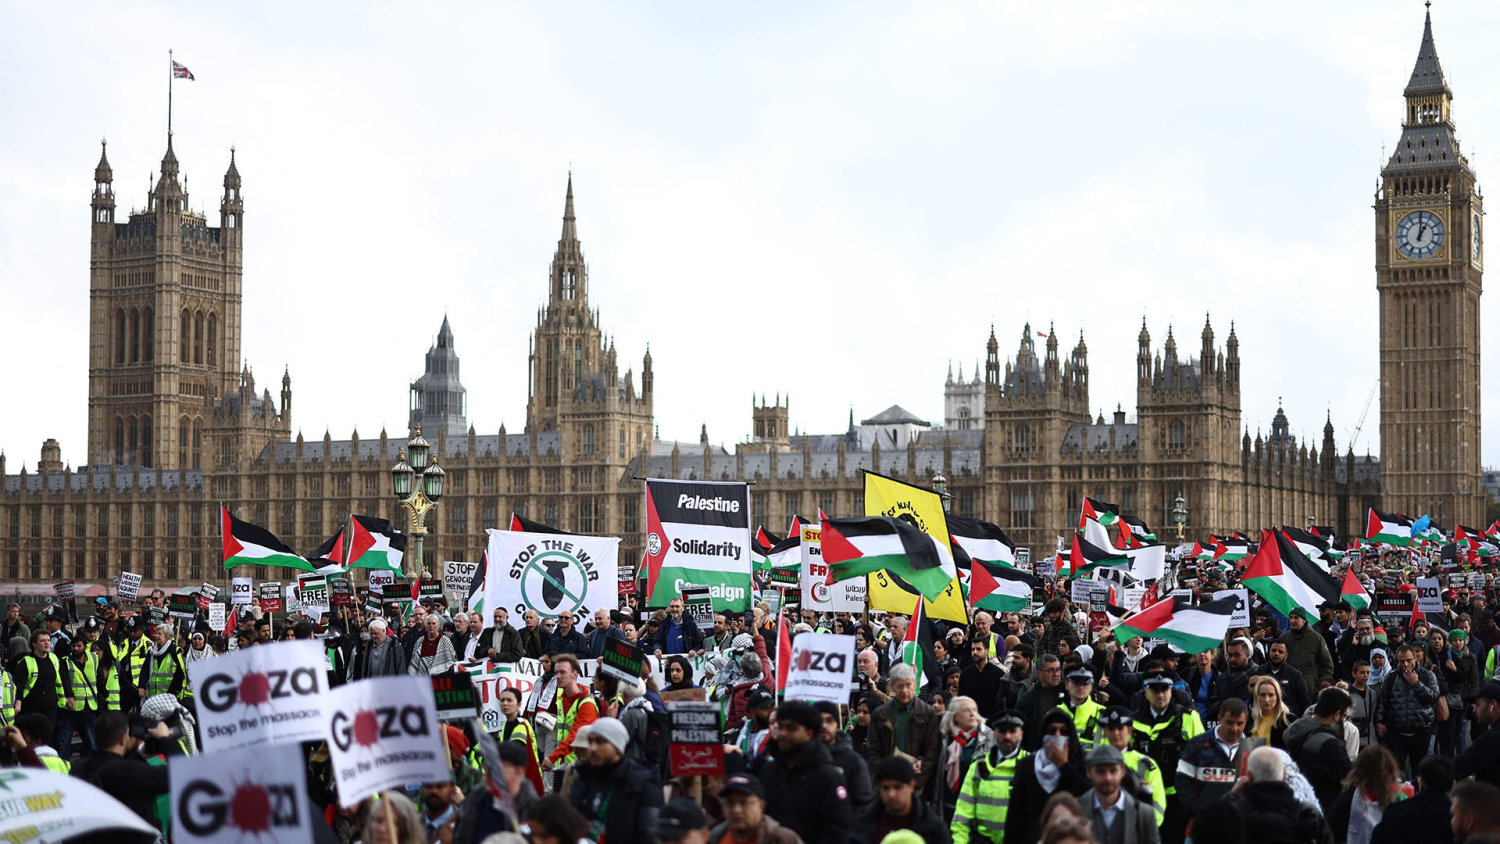 Thousands join pro-Palestinian demonstration in London